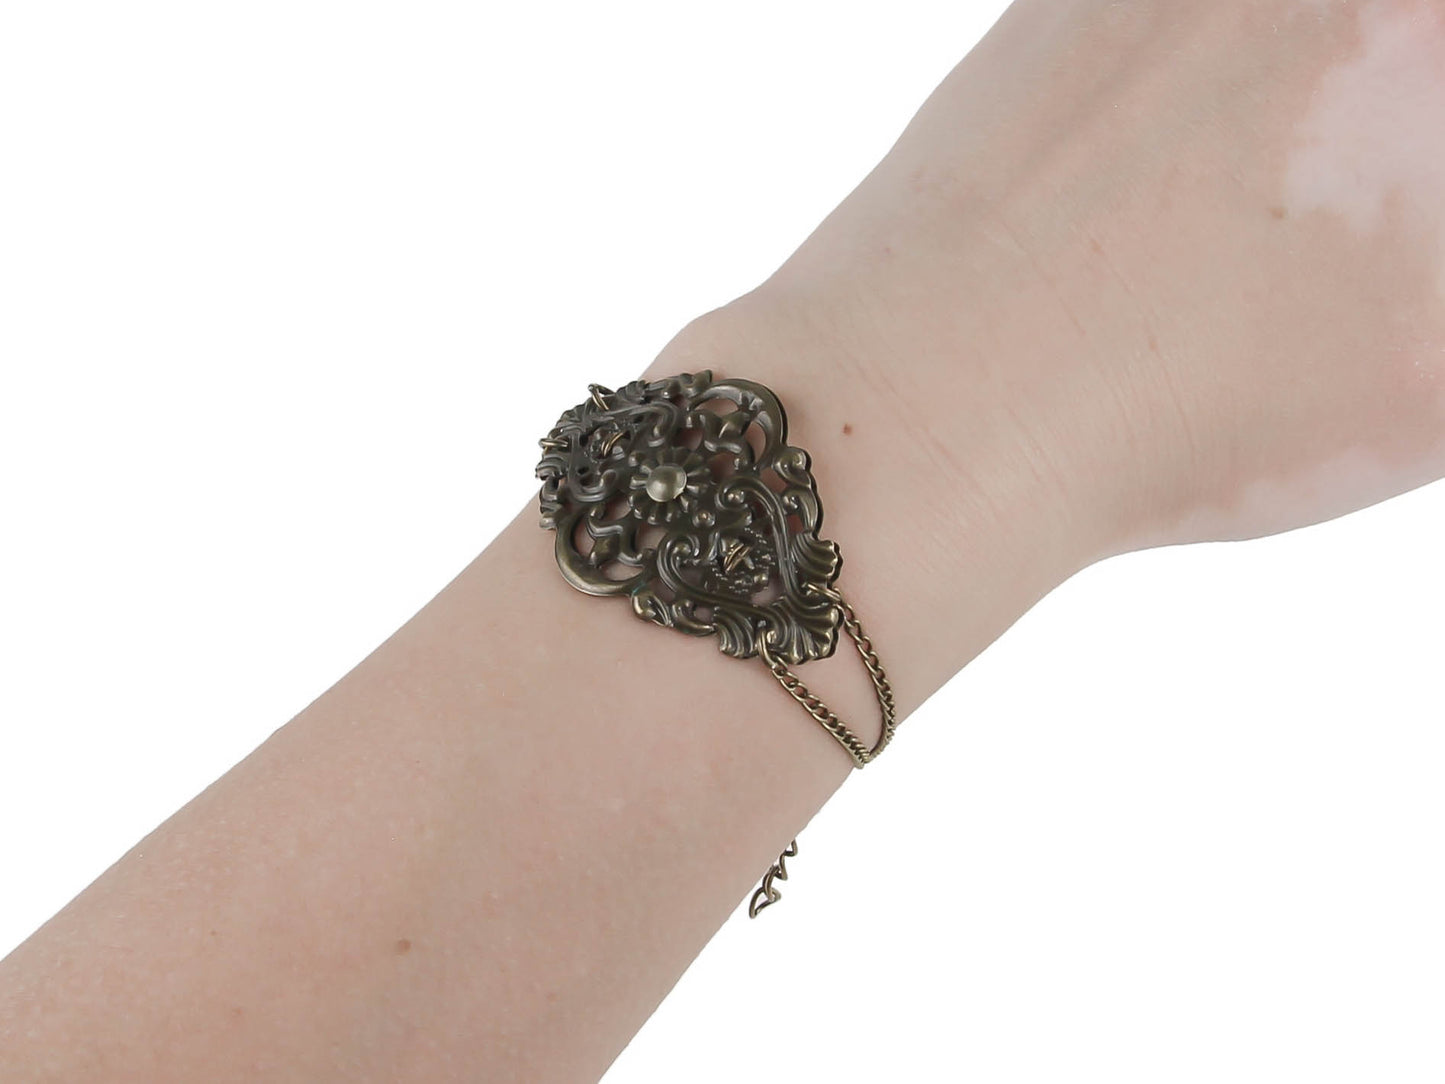 This Myril Jewels filigree bracelet exudes a darkly romantic allure, perfect for the avant-garde gothic enthusiast. Intricately designed, the bracelet blends timeless filigree art with modern punk accents, ideal for Halloween, Neo Gothic events, and Gothic-chic fashion. It's a versatile piece that also resonates with the Whimsigoth and Witchcore communities, offering a touch of everyday elegance to the minimal goth wardrobe